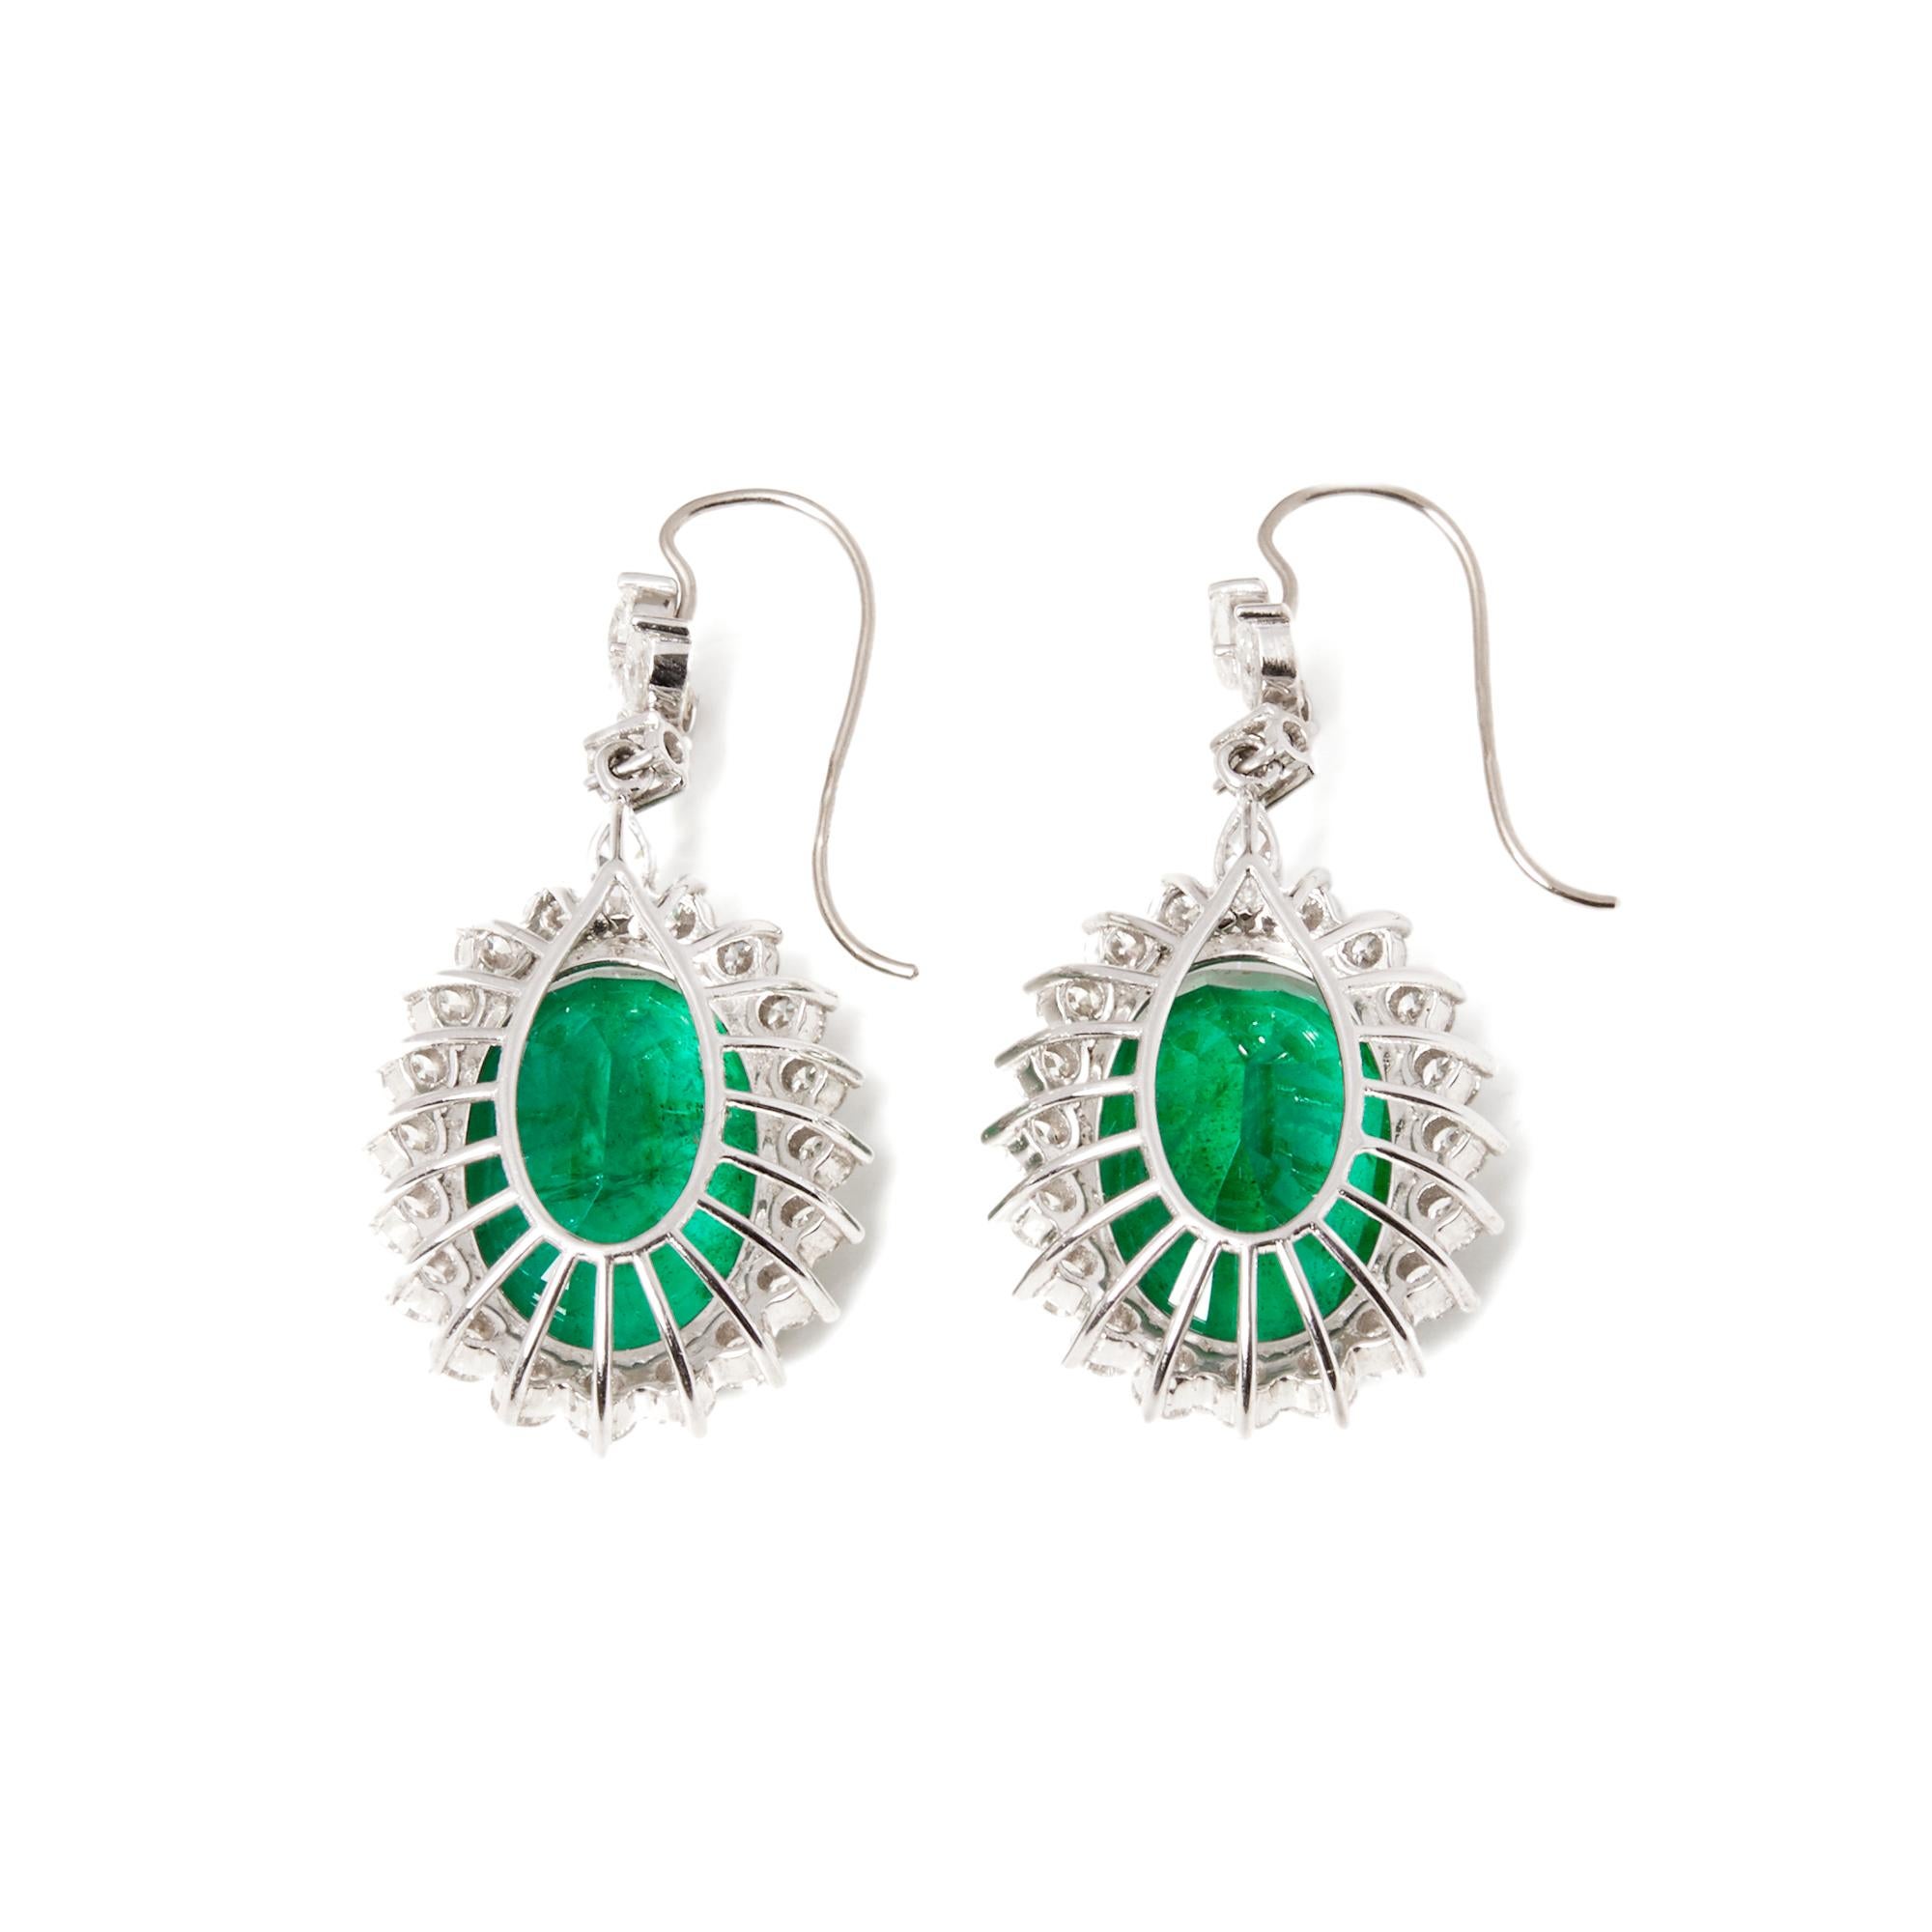 These earrings designed by David Jerome are from his private collection and feature two oval cut Emeralds sourced from the Chivor Mine Columbia 35.17 in total carat weight. These stones have both been cut from the same crystal so match perfectly in